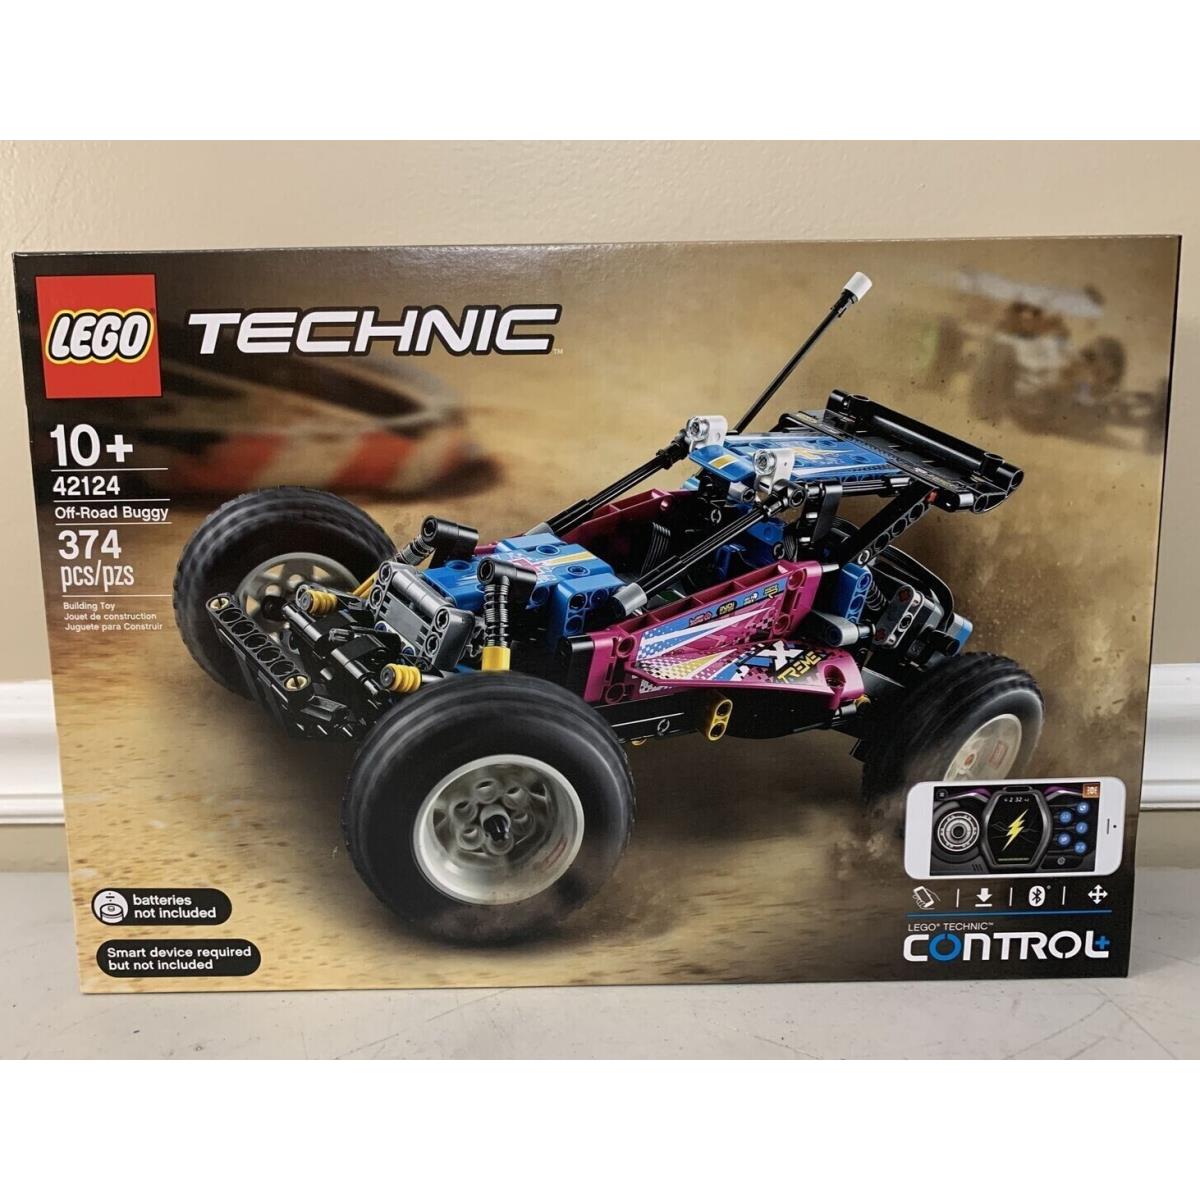 Lego Technic Off- Road Buggy 42124 Toy Car Building Set 374 Pieces